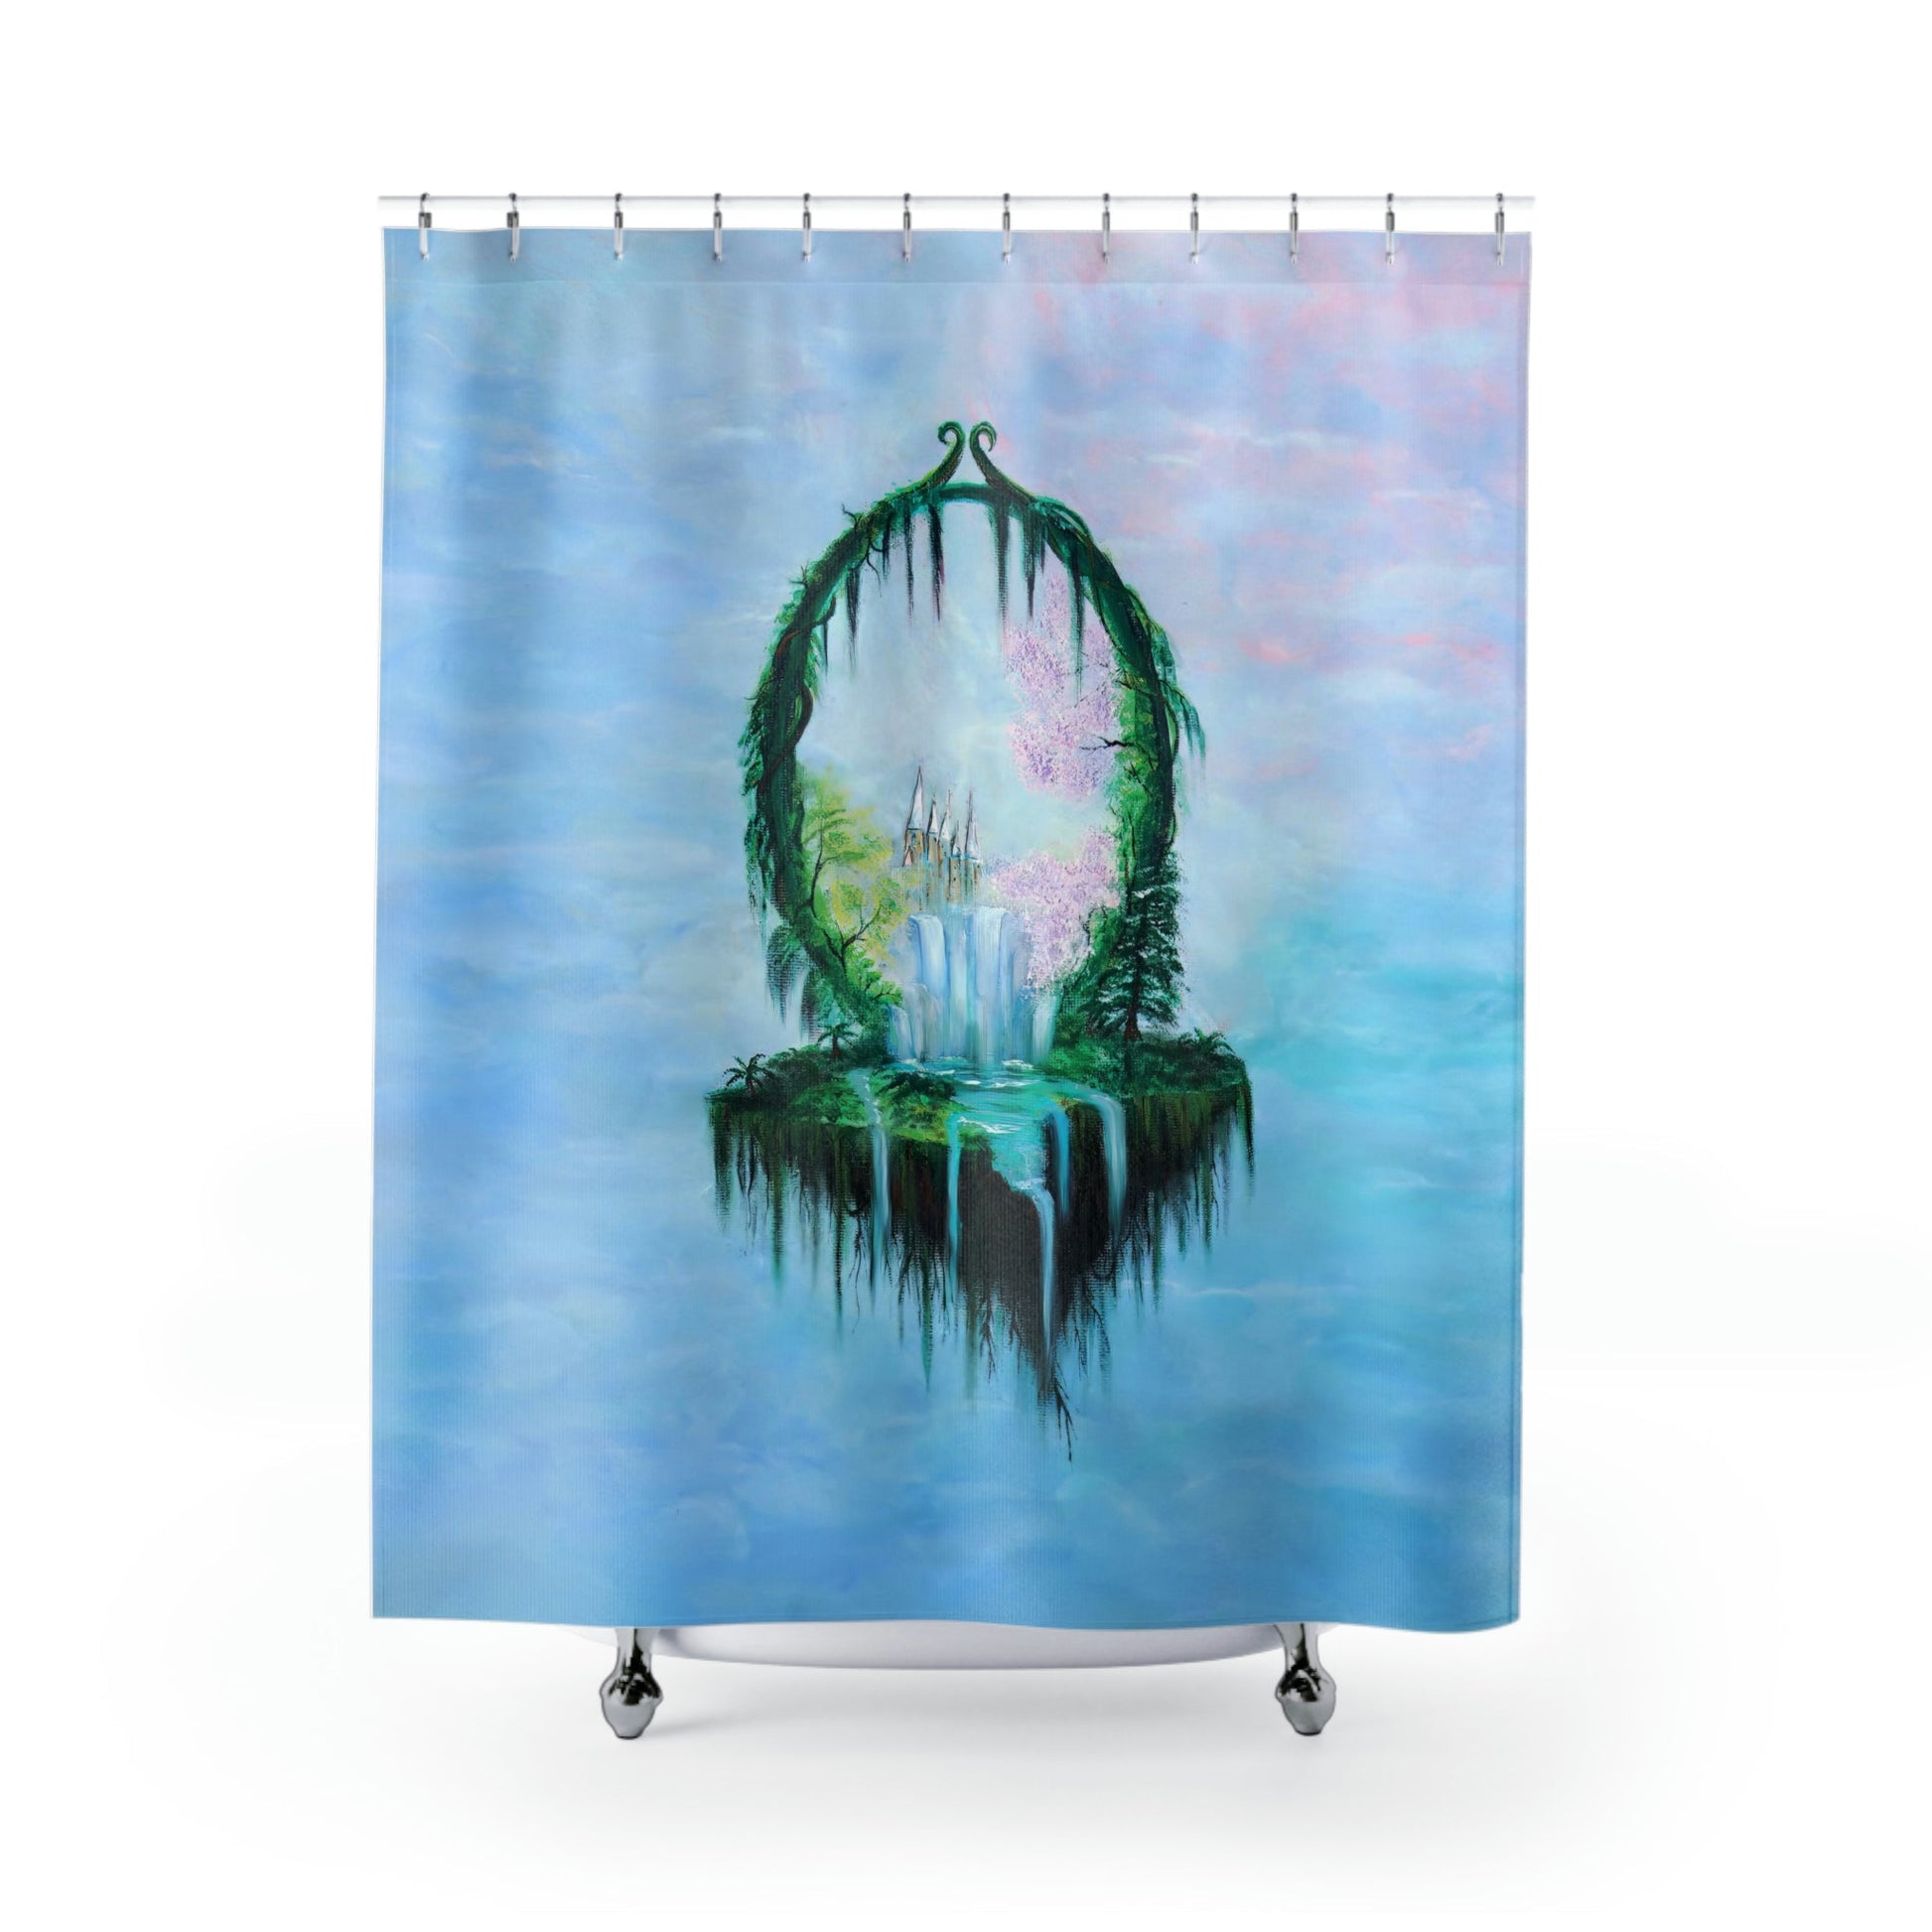 Shower Curtain - "FLOATING CASTLE"